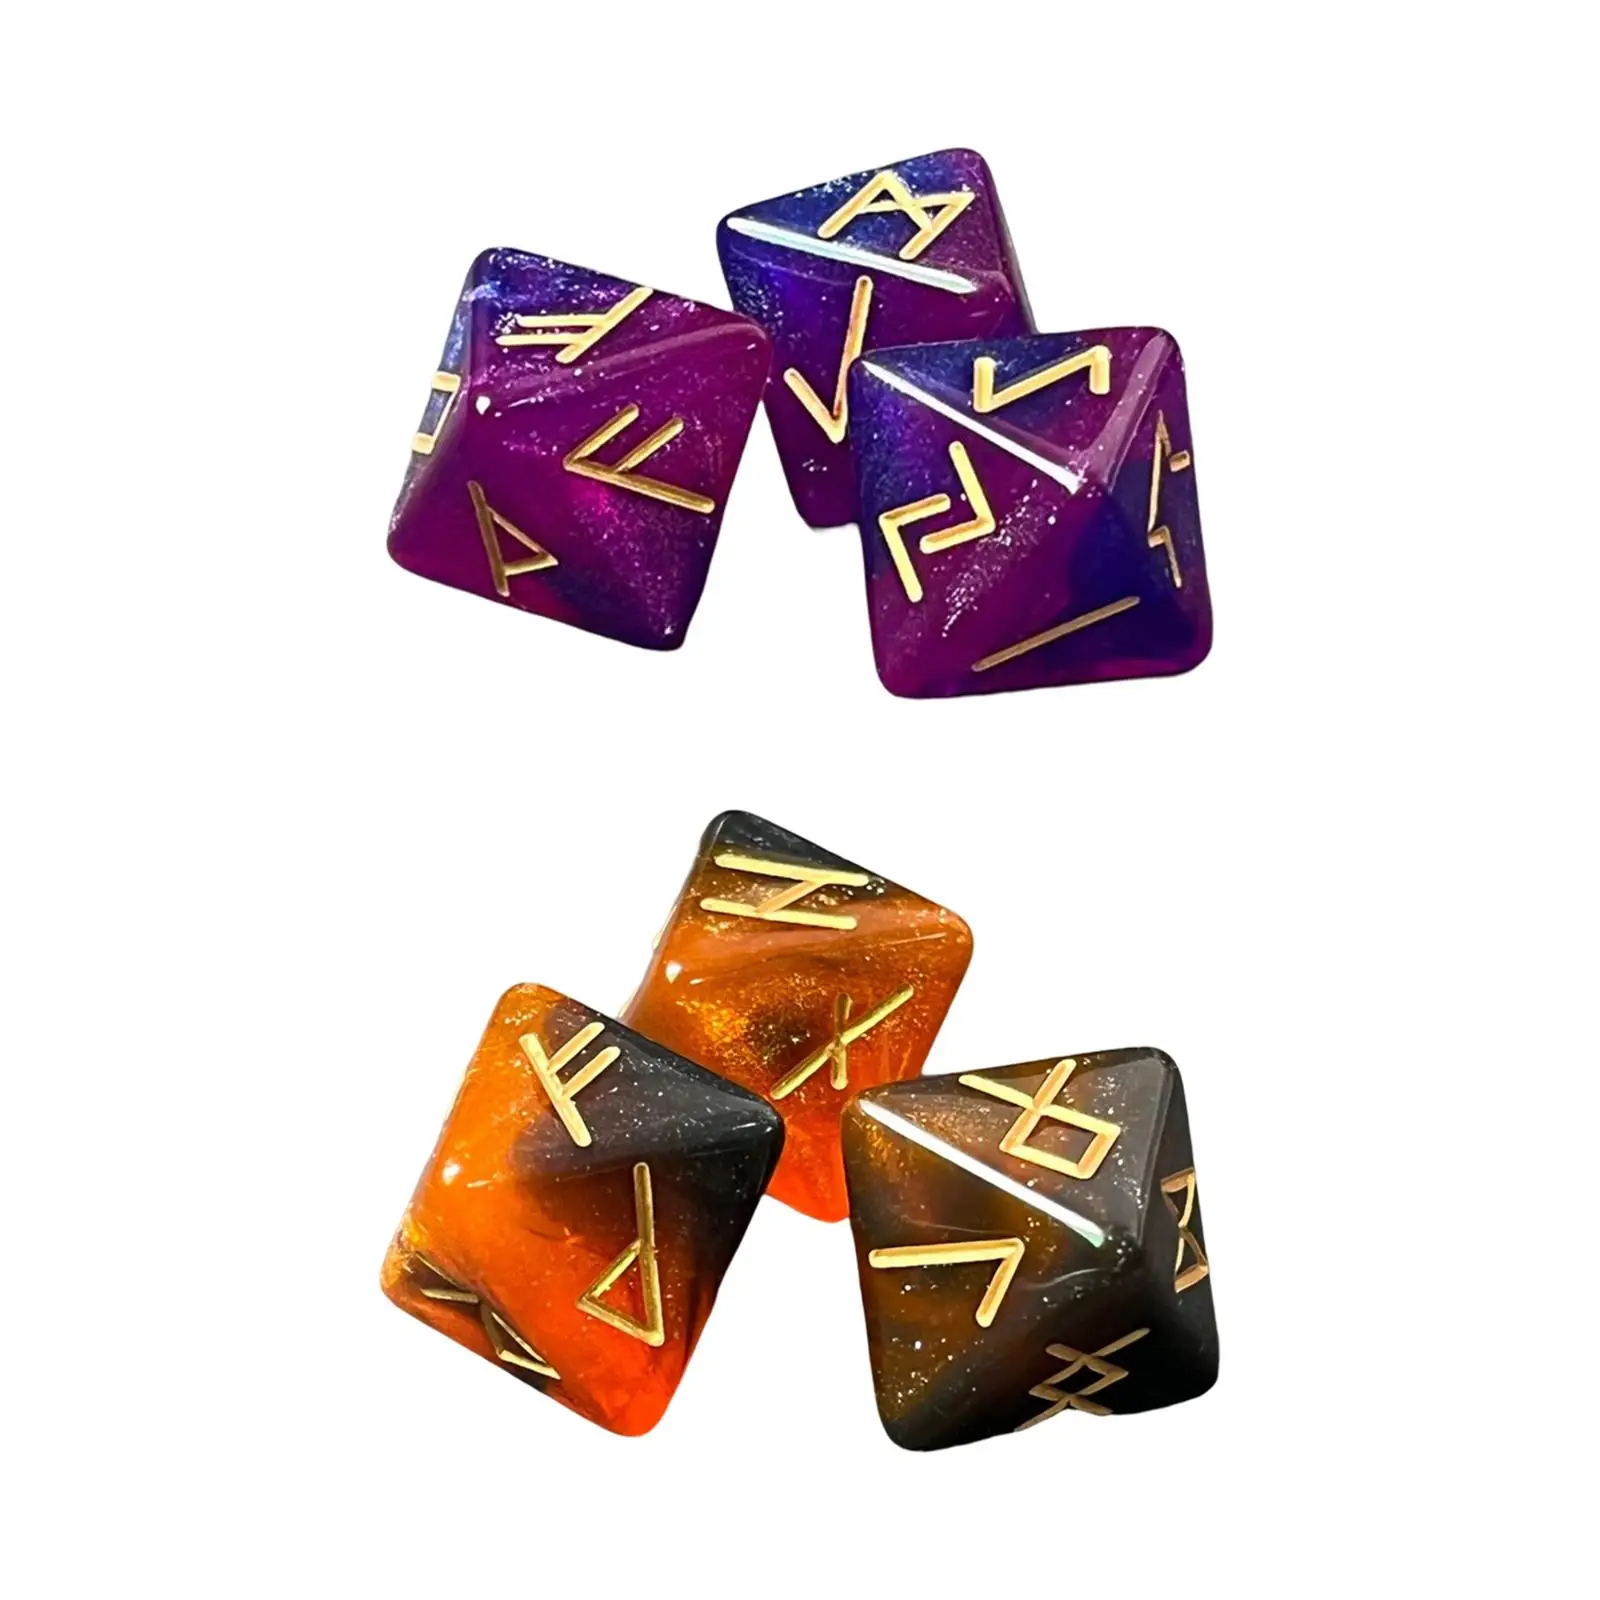 3Pcs Polyhedral Rune Dice Leisure and Entertainment Toys Star Divination Tarot Constellation Rune Dice for Role Playing Games